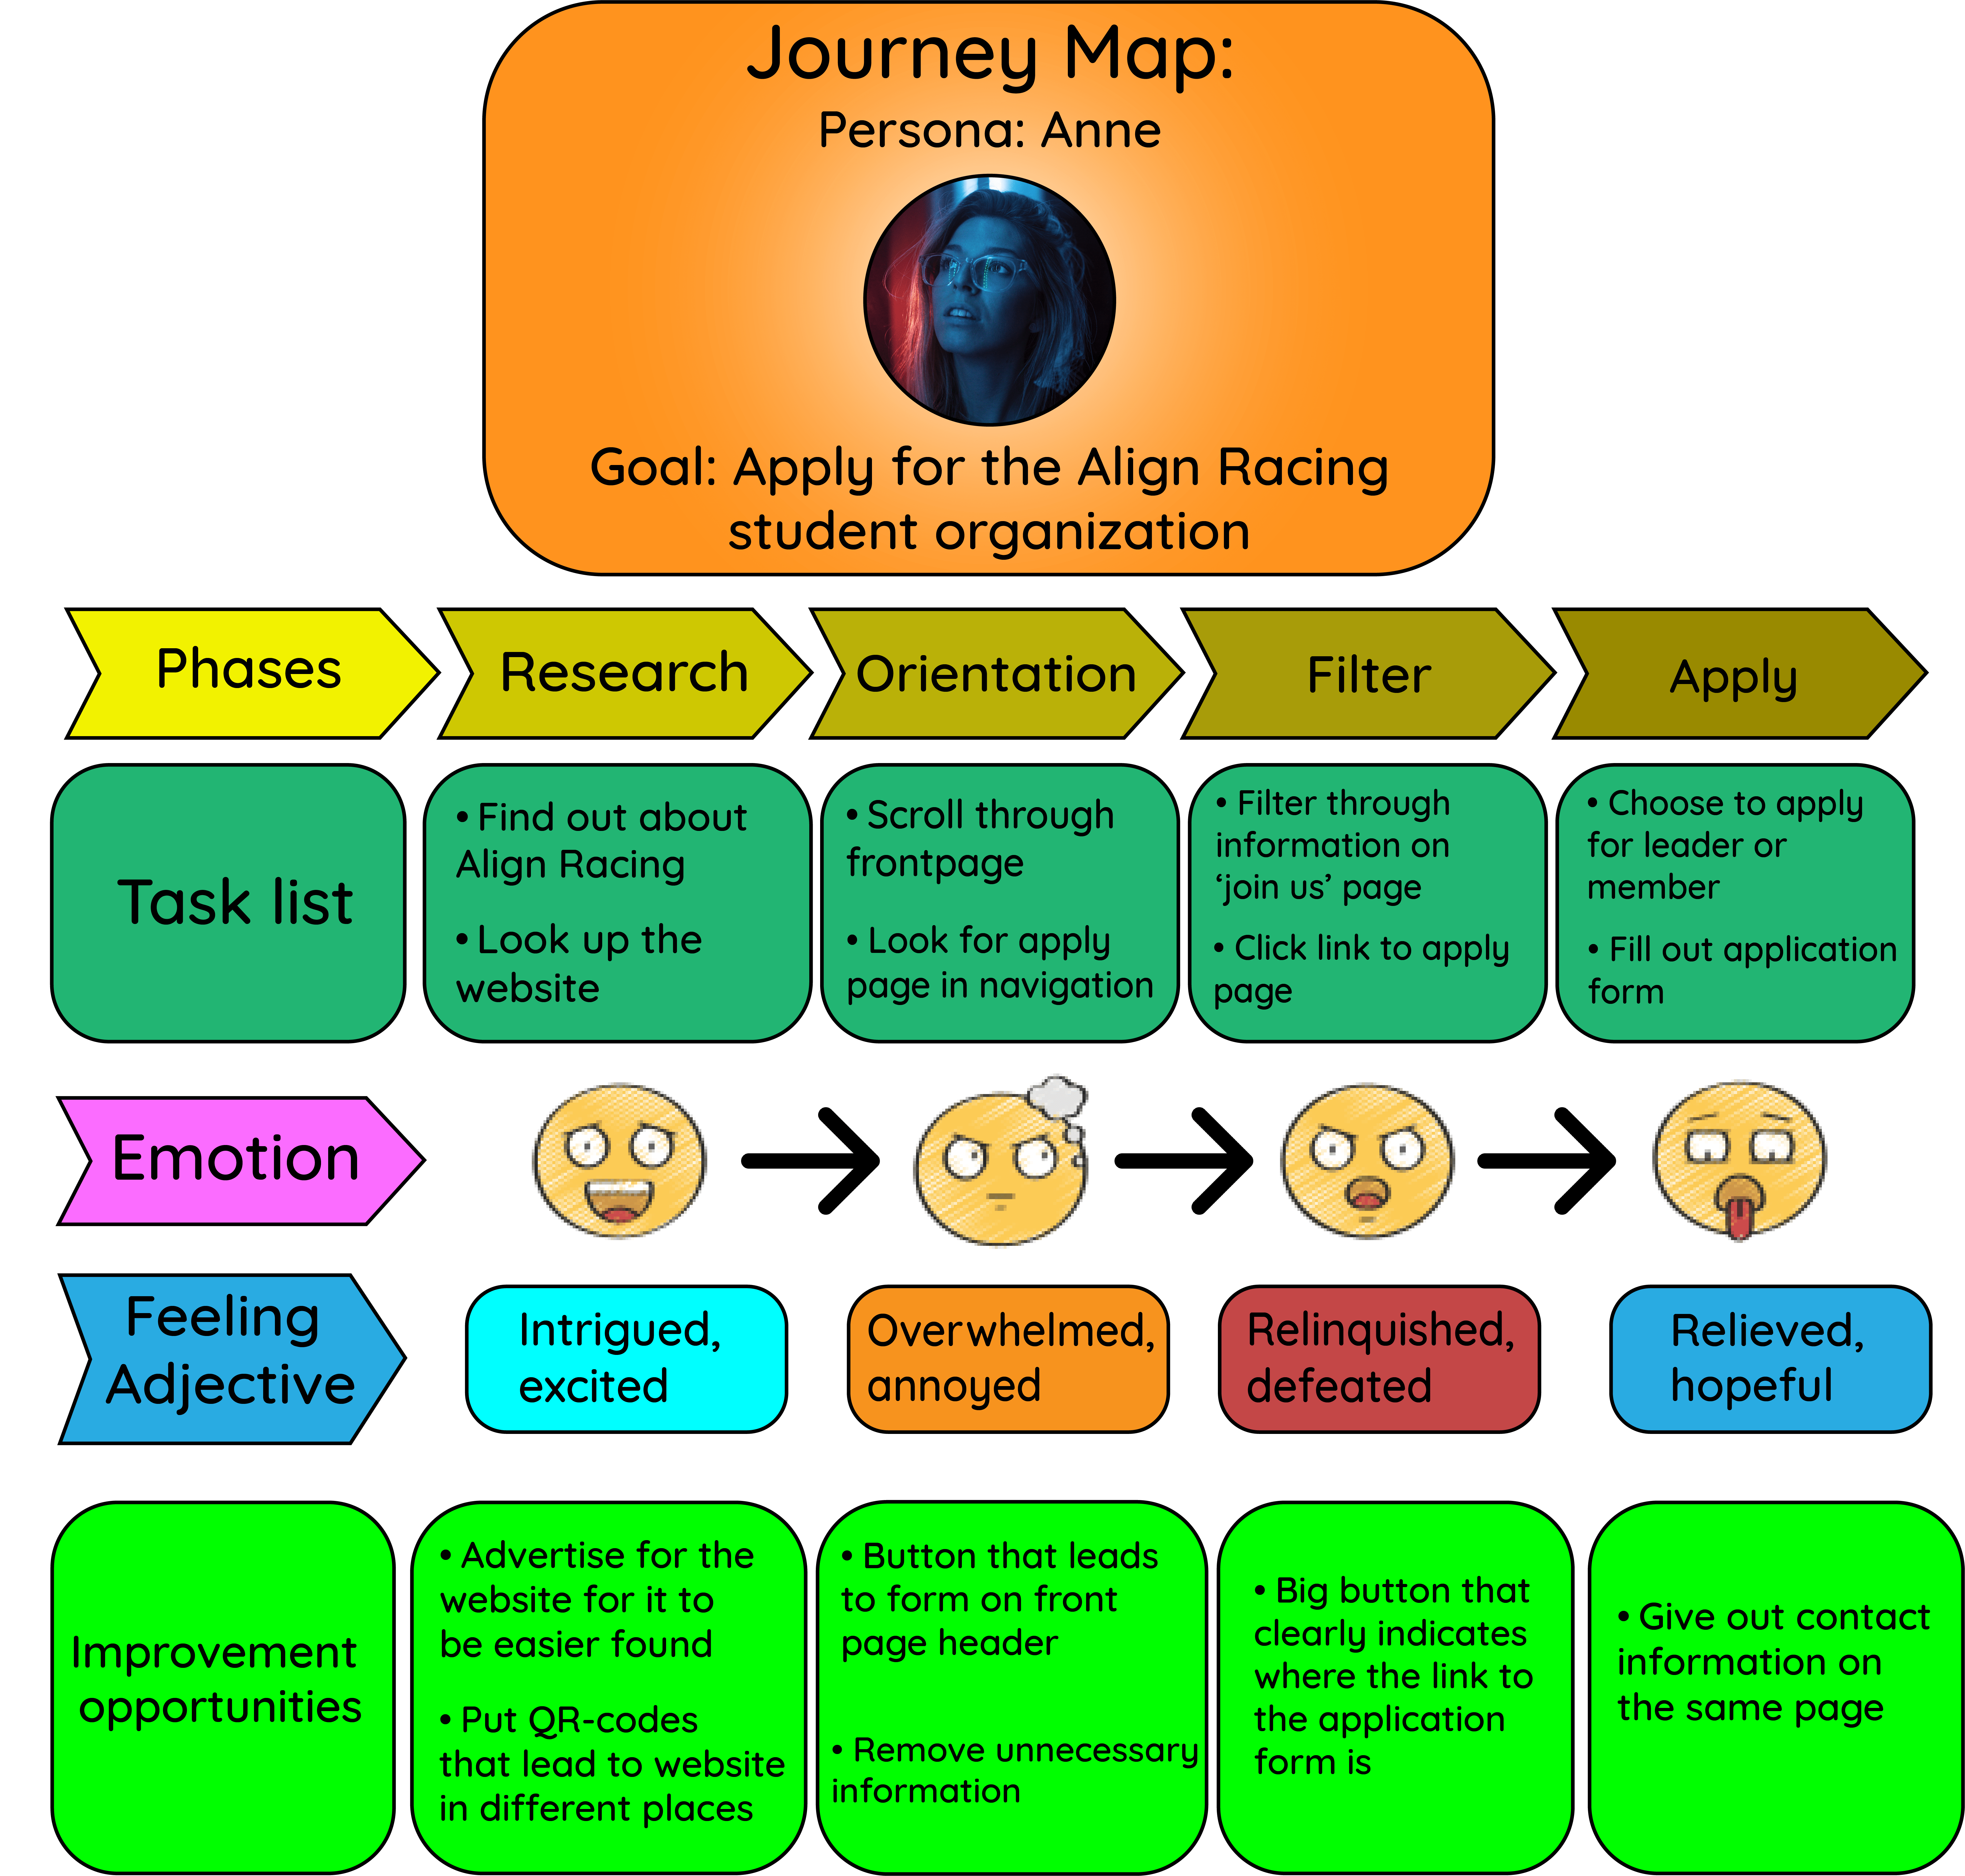 user journey map - Anne - Align Racing